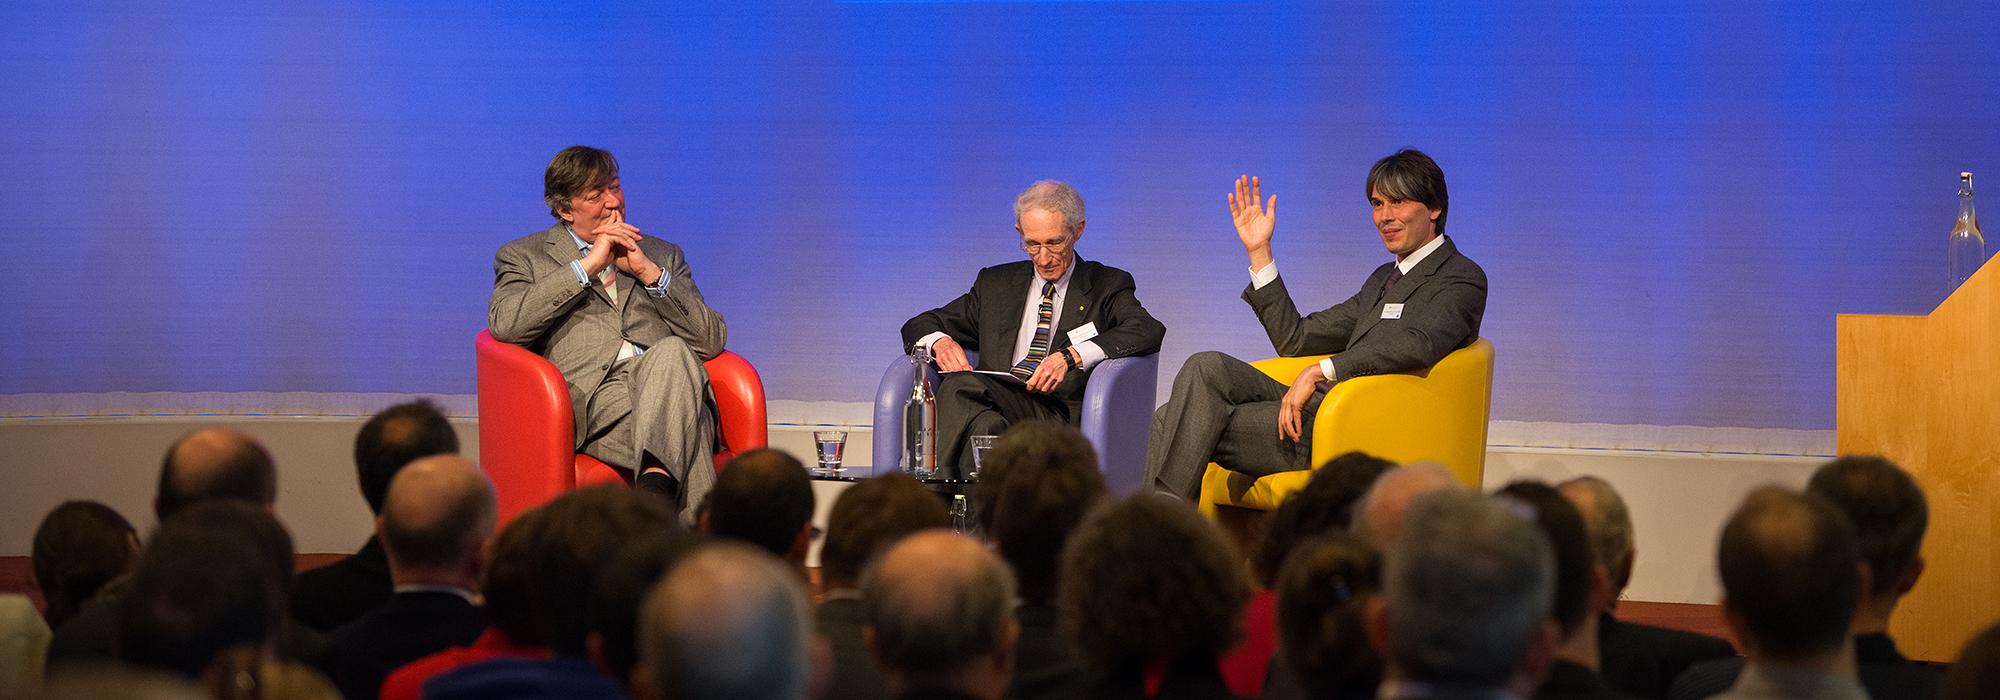 Stephen Fry, Robert May and Brian Cox in conversation at the Royal Society - Photo: © John Cairns - www.johncairns.co.uk